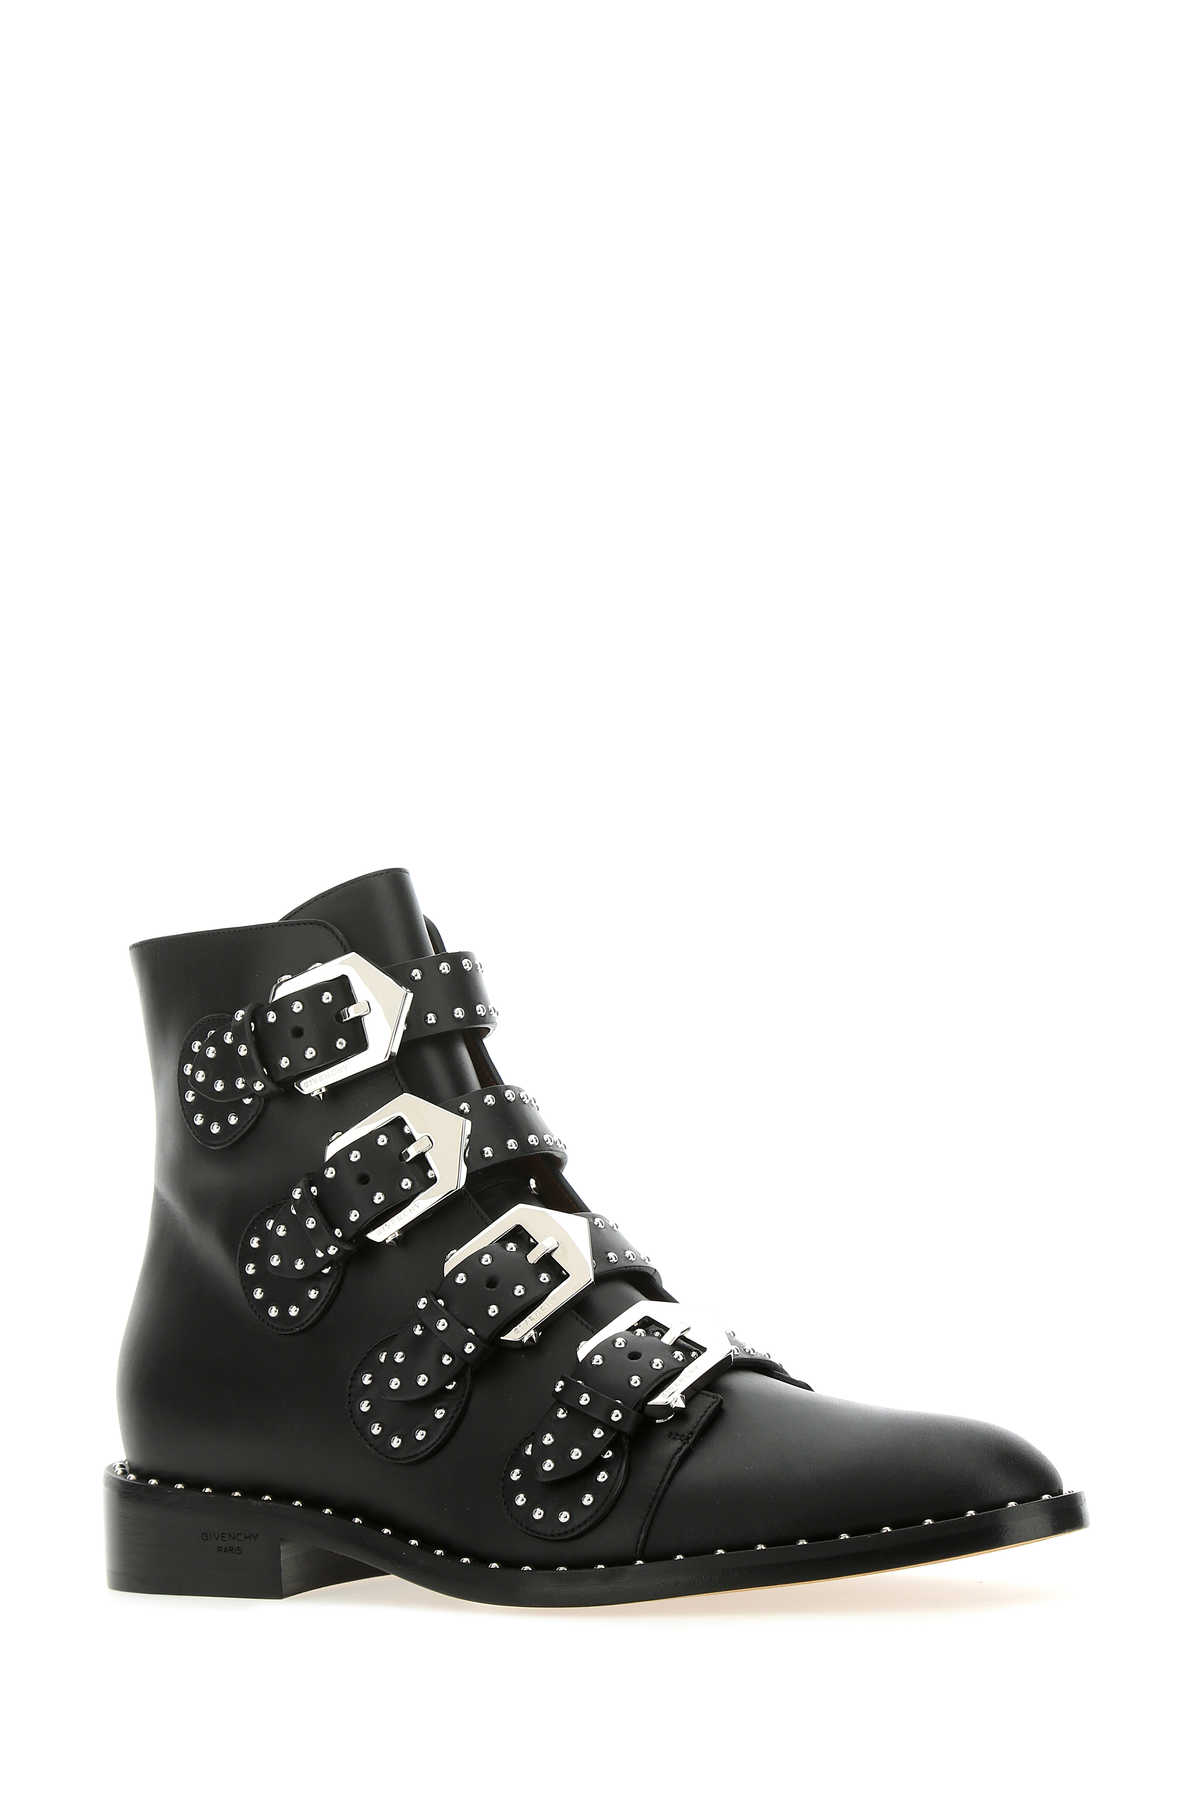 GIVENCHY BLACK LEATHER ANKLE BOOTS